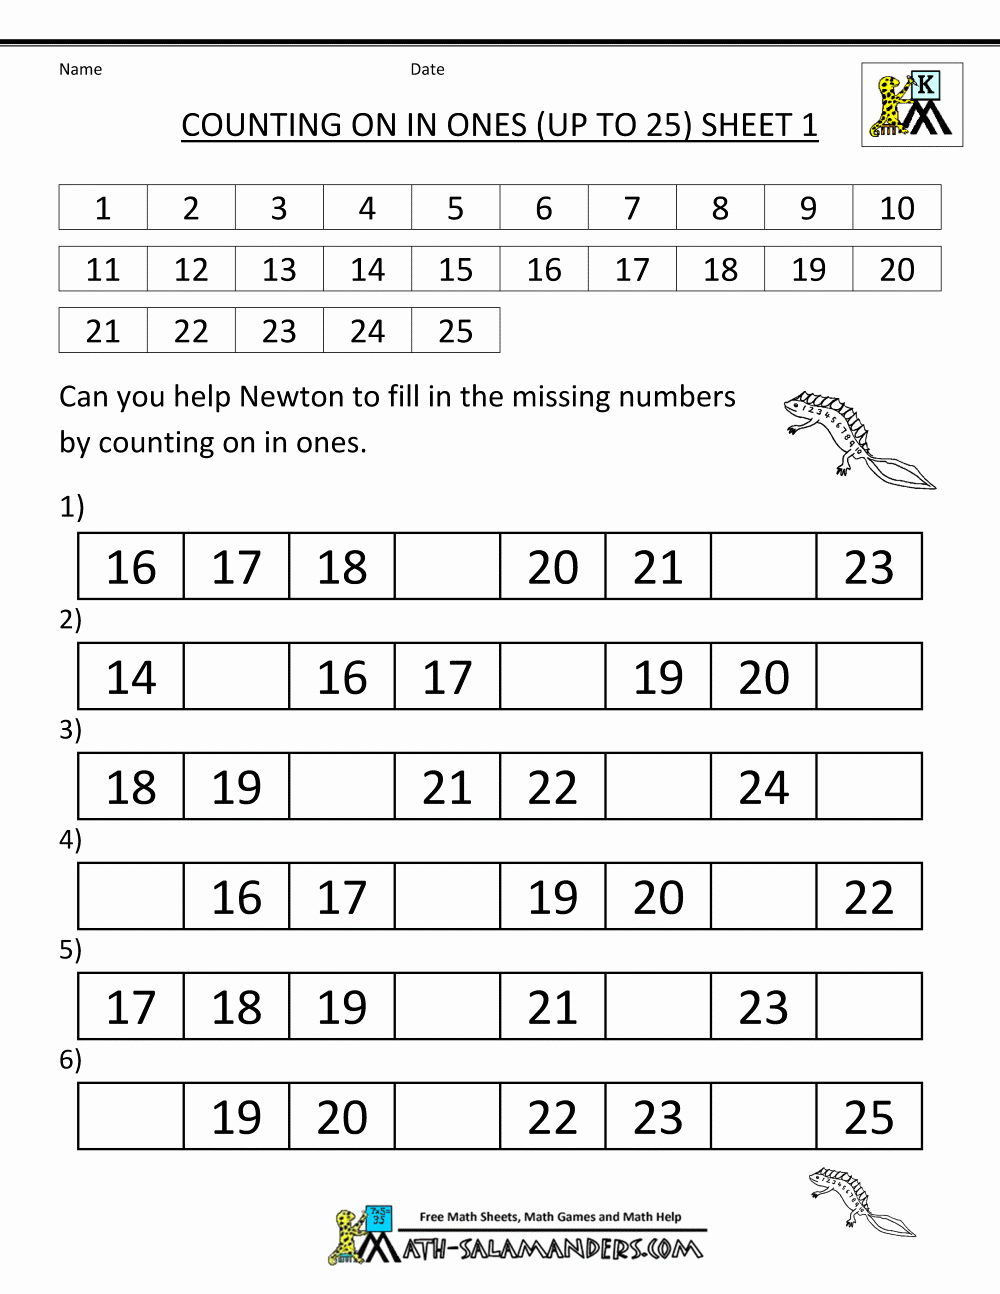 Arithmetic Sequence Worksheet Algebra 1 Best Of Kindergarten Counting Worksheets Sequencing to 25